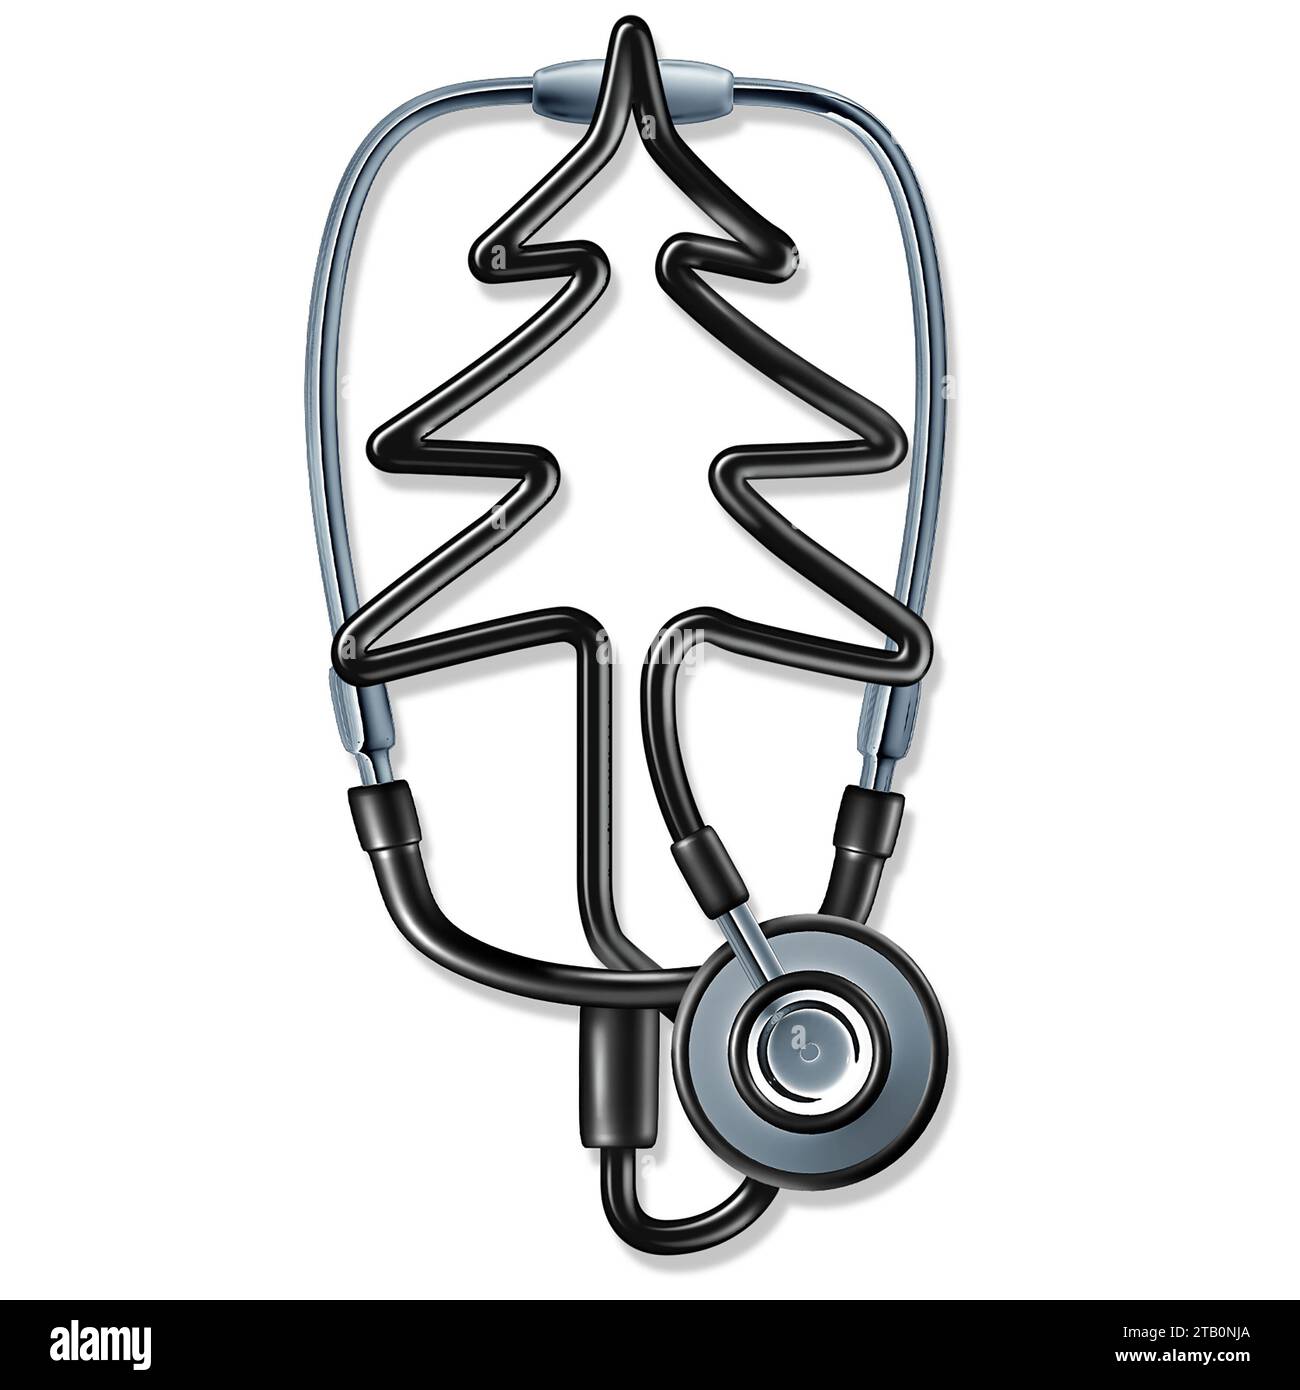 Health Care Holiday greeting and healthcare professionals Christmas season symbol with a Doctor or Nurse stethoscope forming a pine tree celebrating H Stock Photo